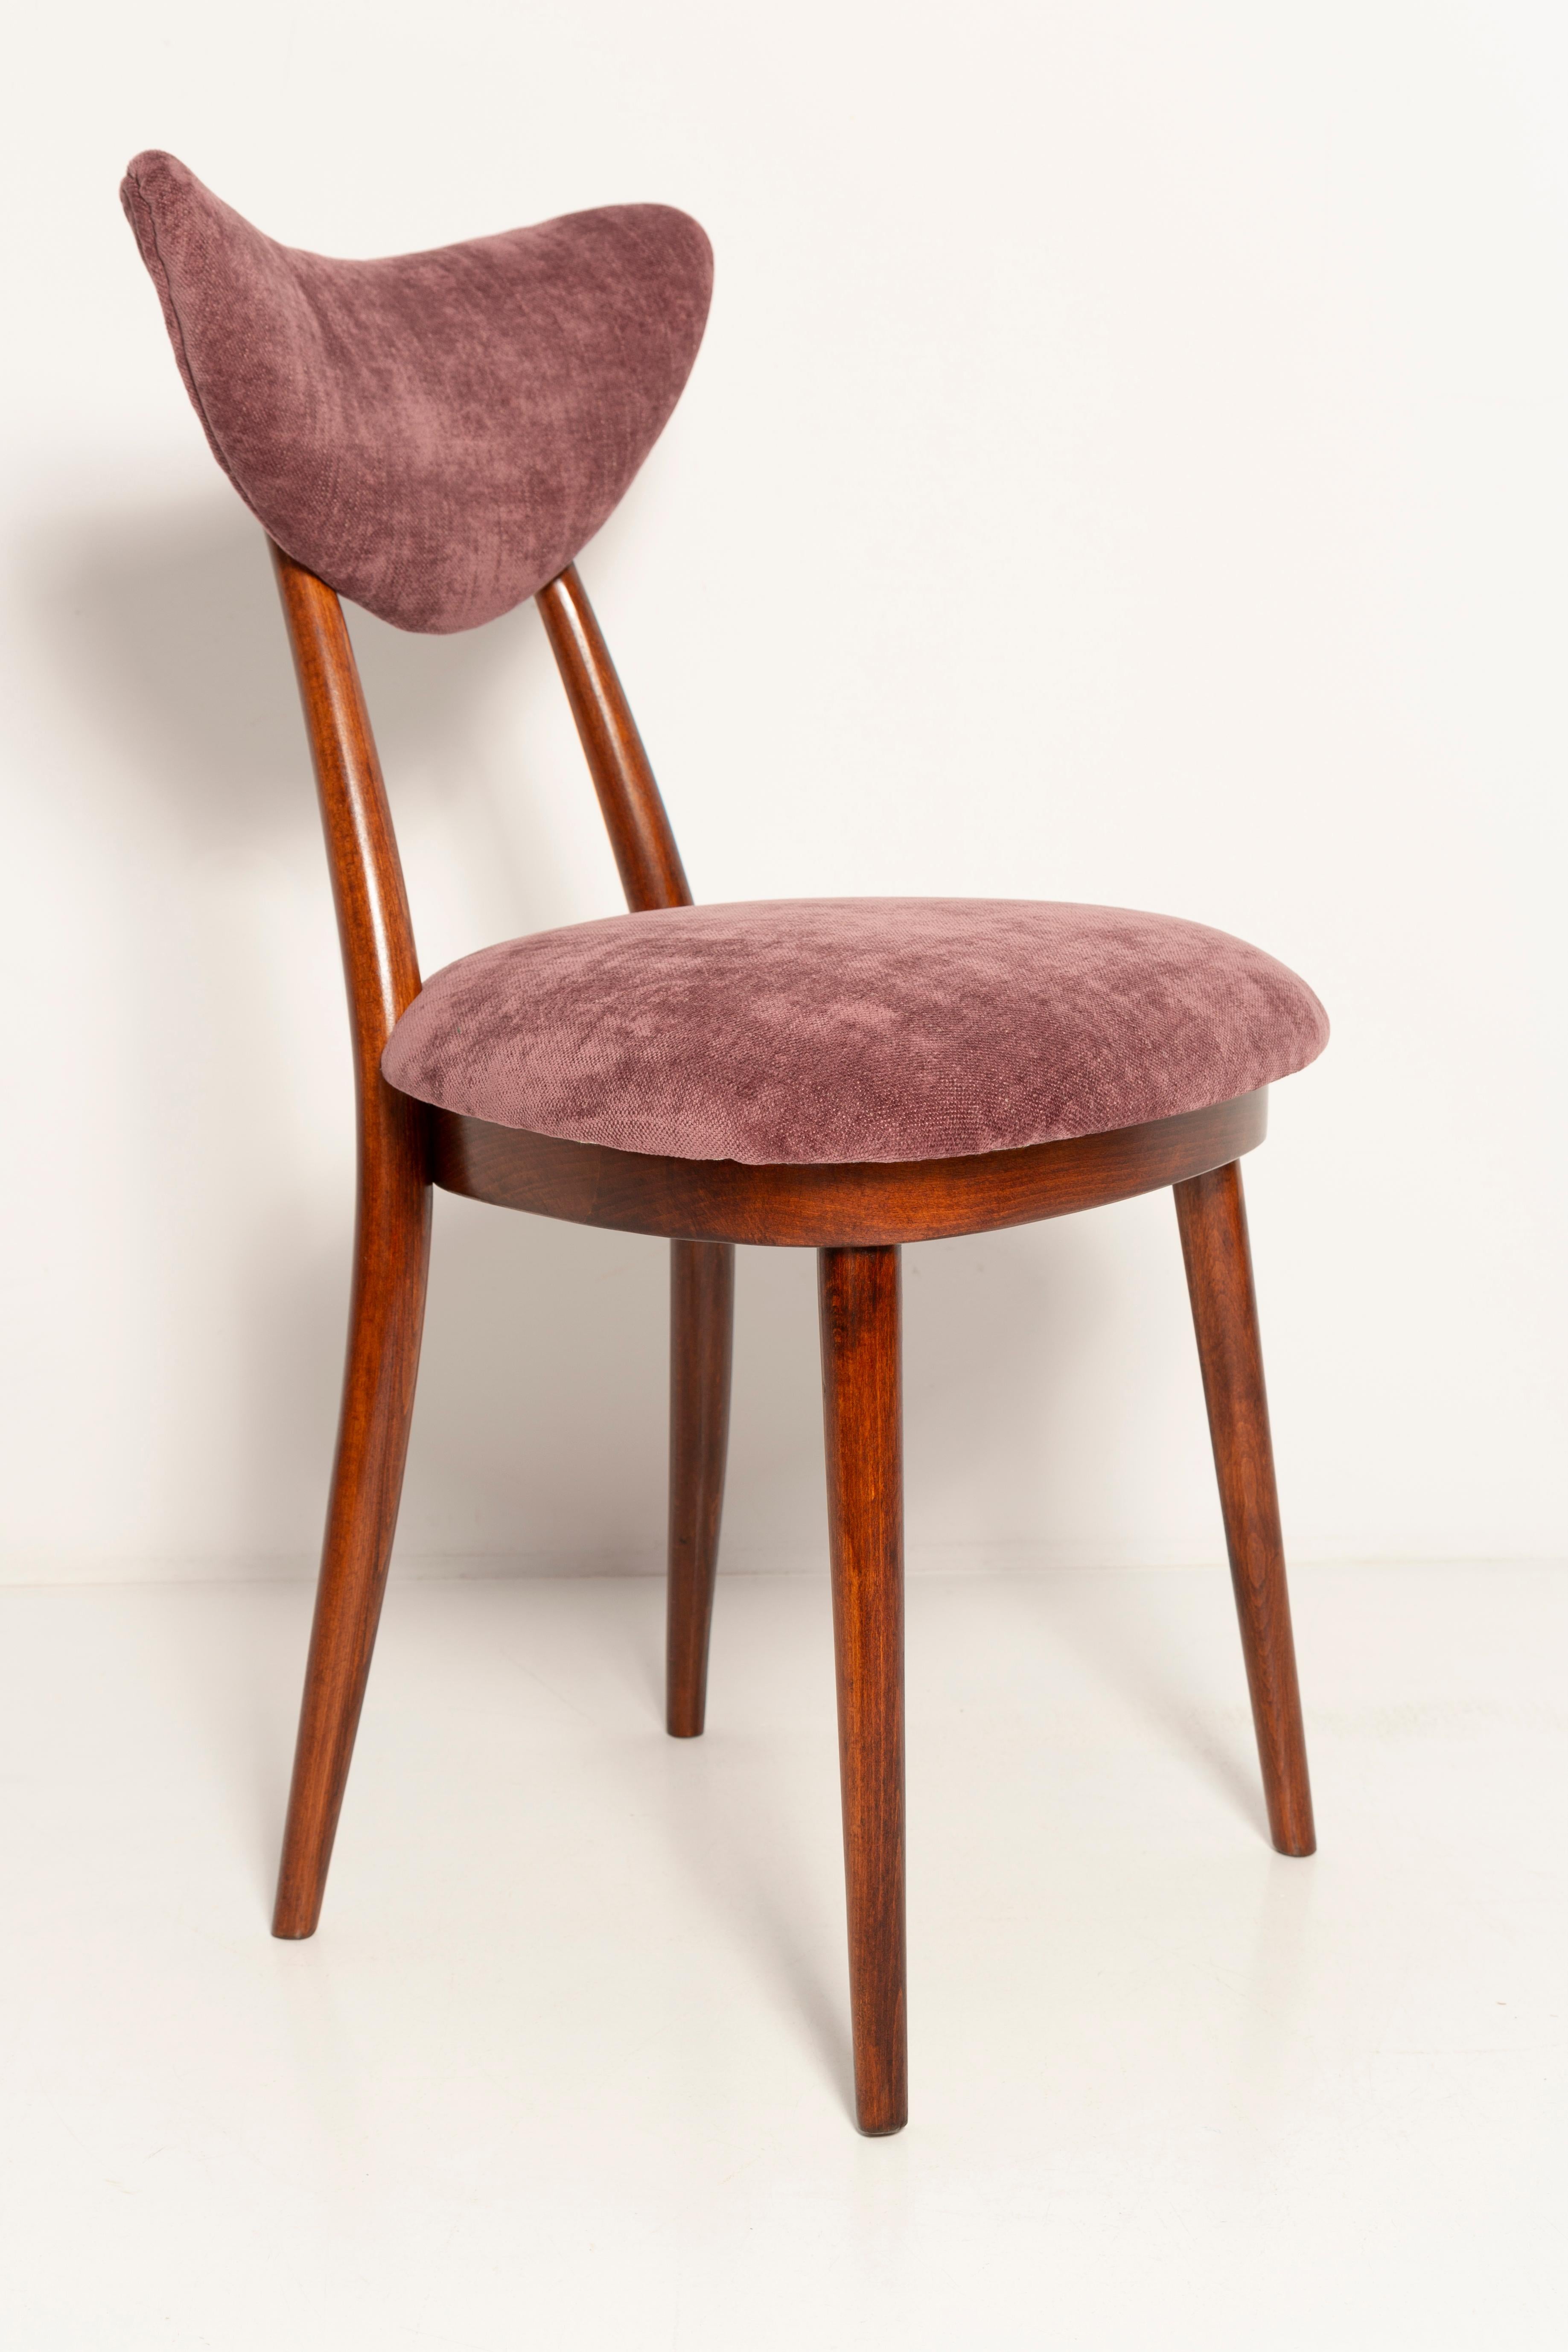 Set of Six Midcentury Burgundy Pink Velvet Heart Chairs, Europe, 1960s For Sale 1